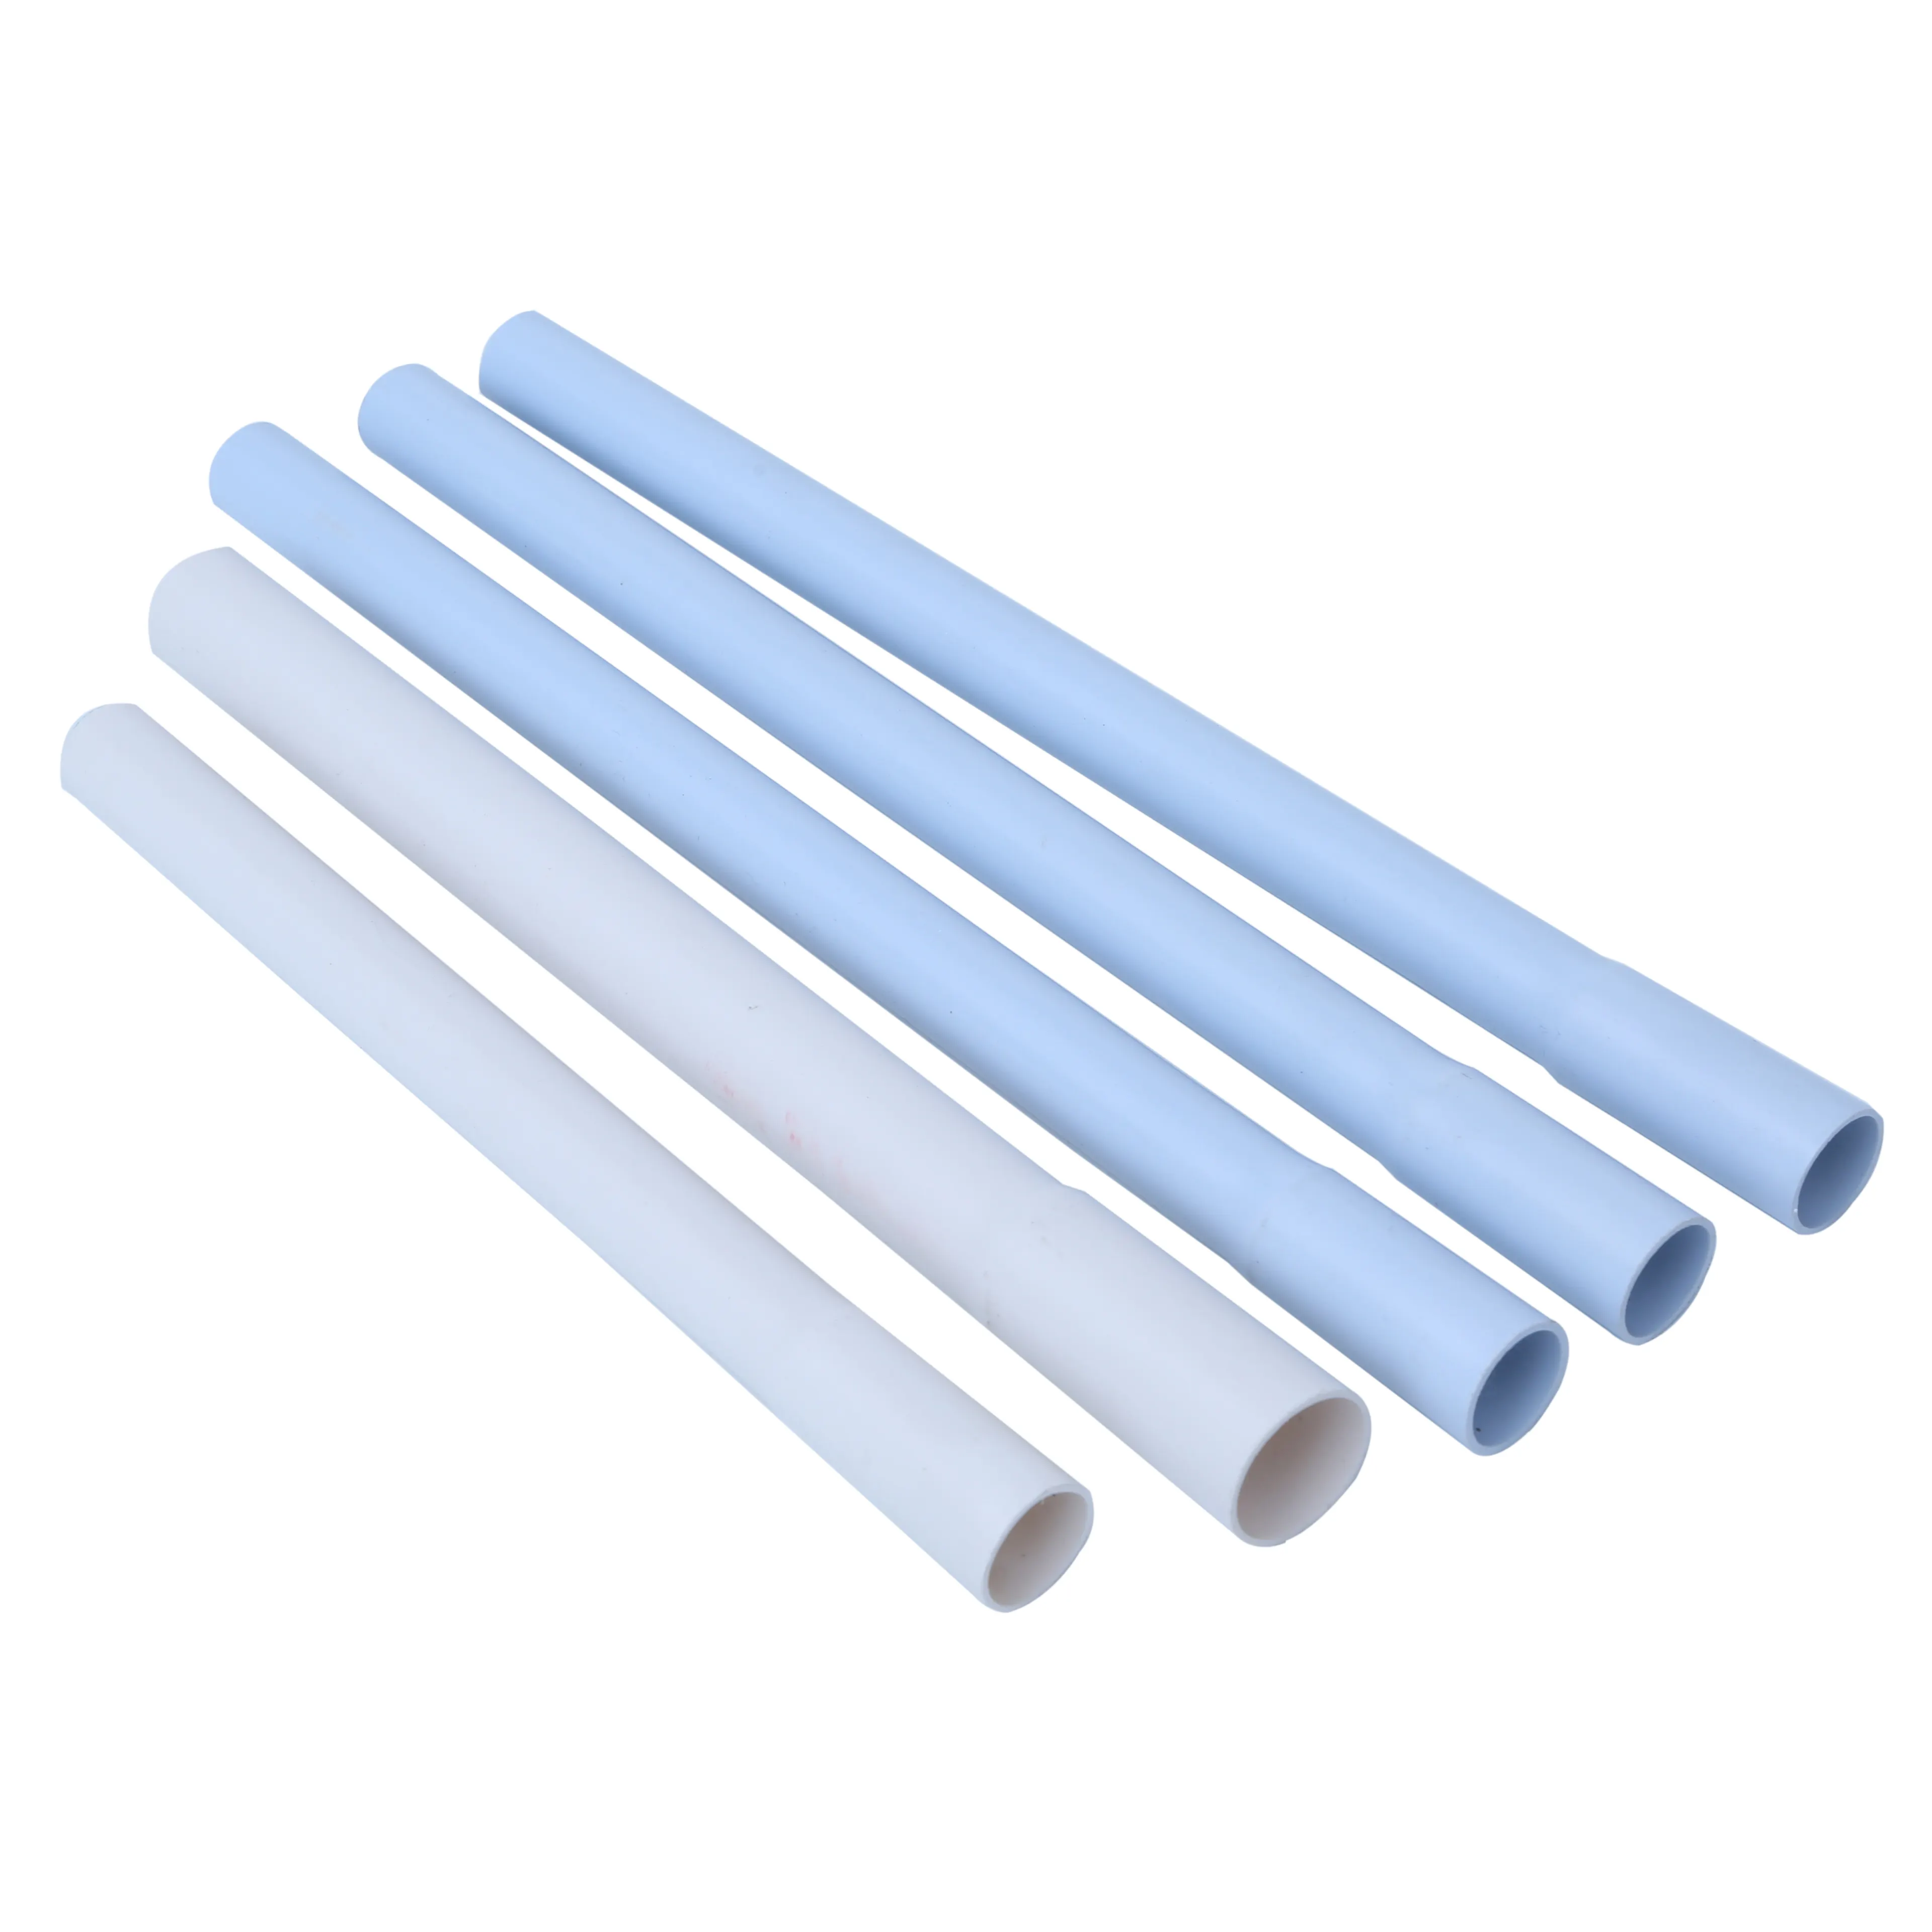 Wholesale plastic pipe Factory price UPVC heat resistant Wire Duct Rigid Electrical Conduit Pipes 16mm 20mm 25mm 32mm